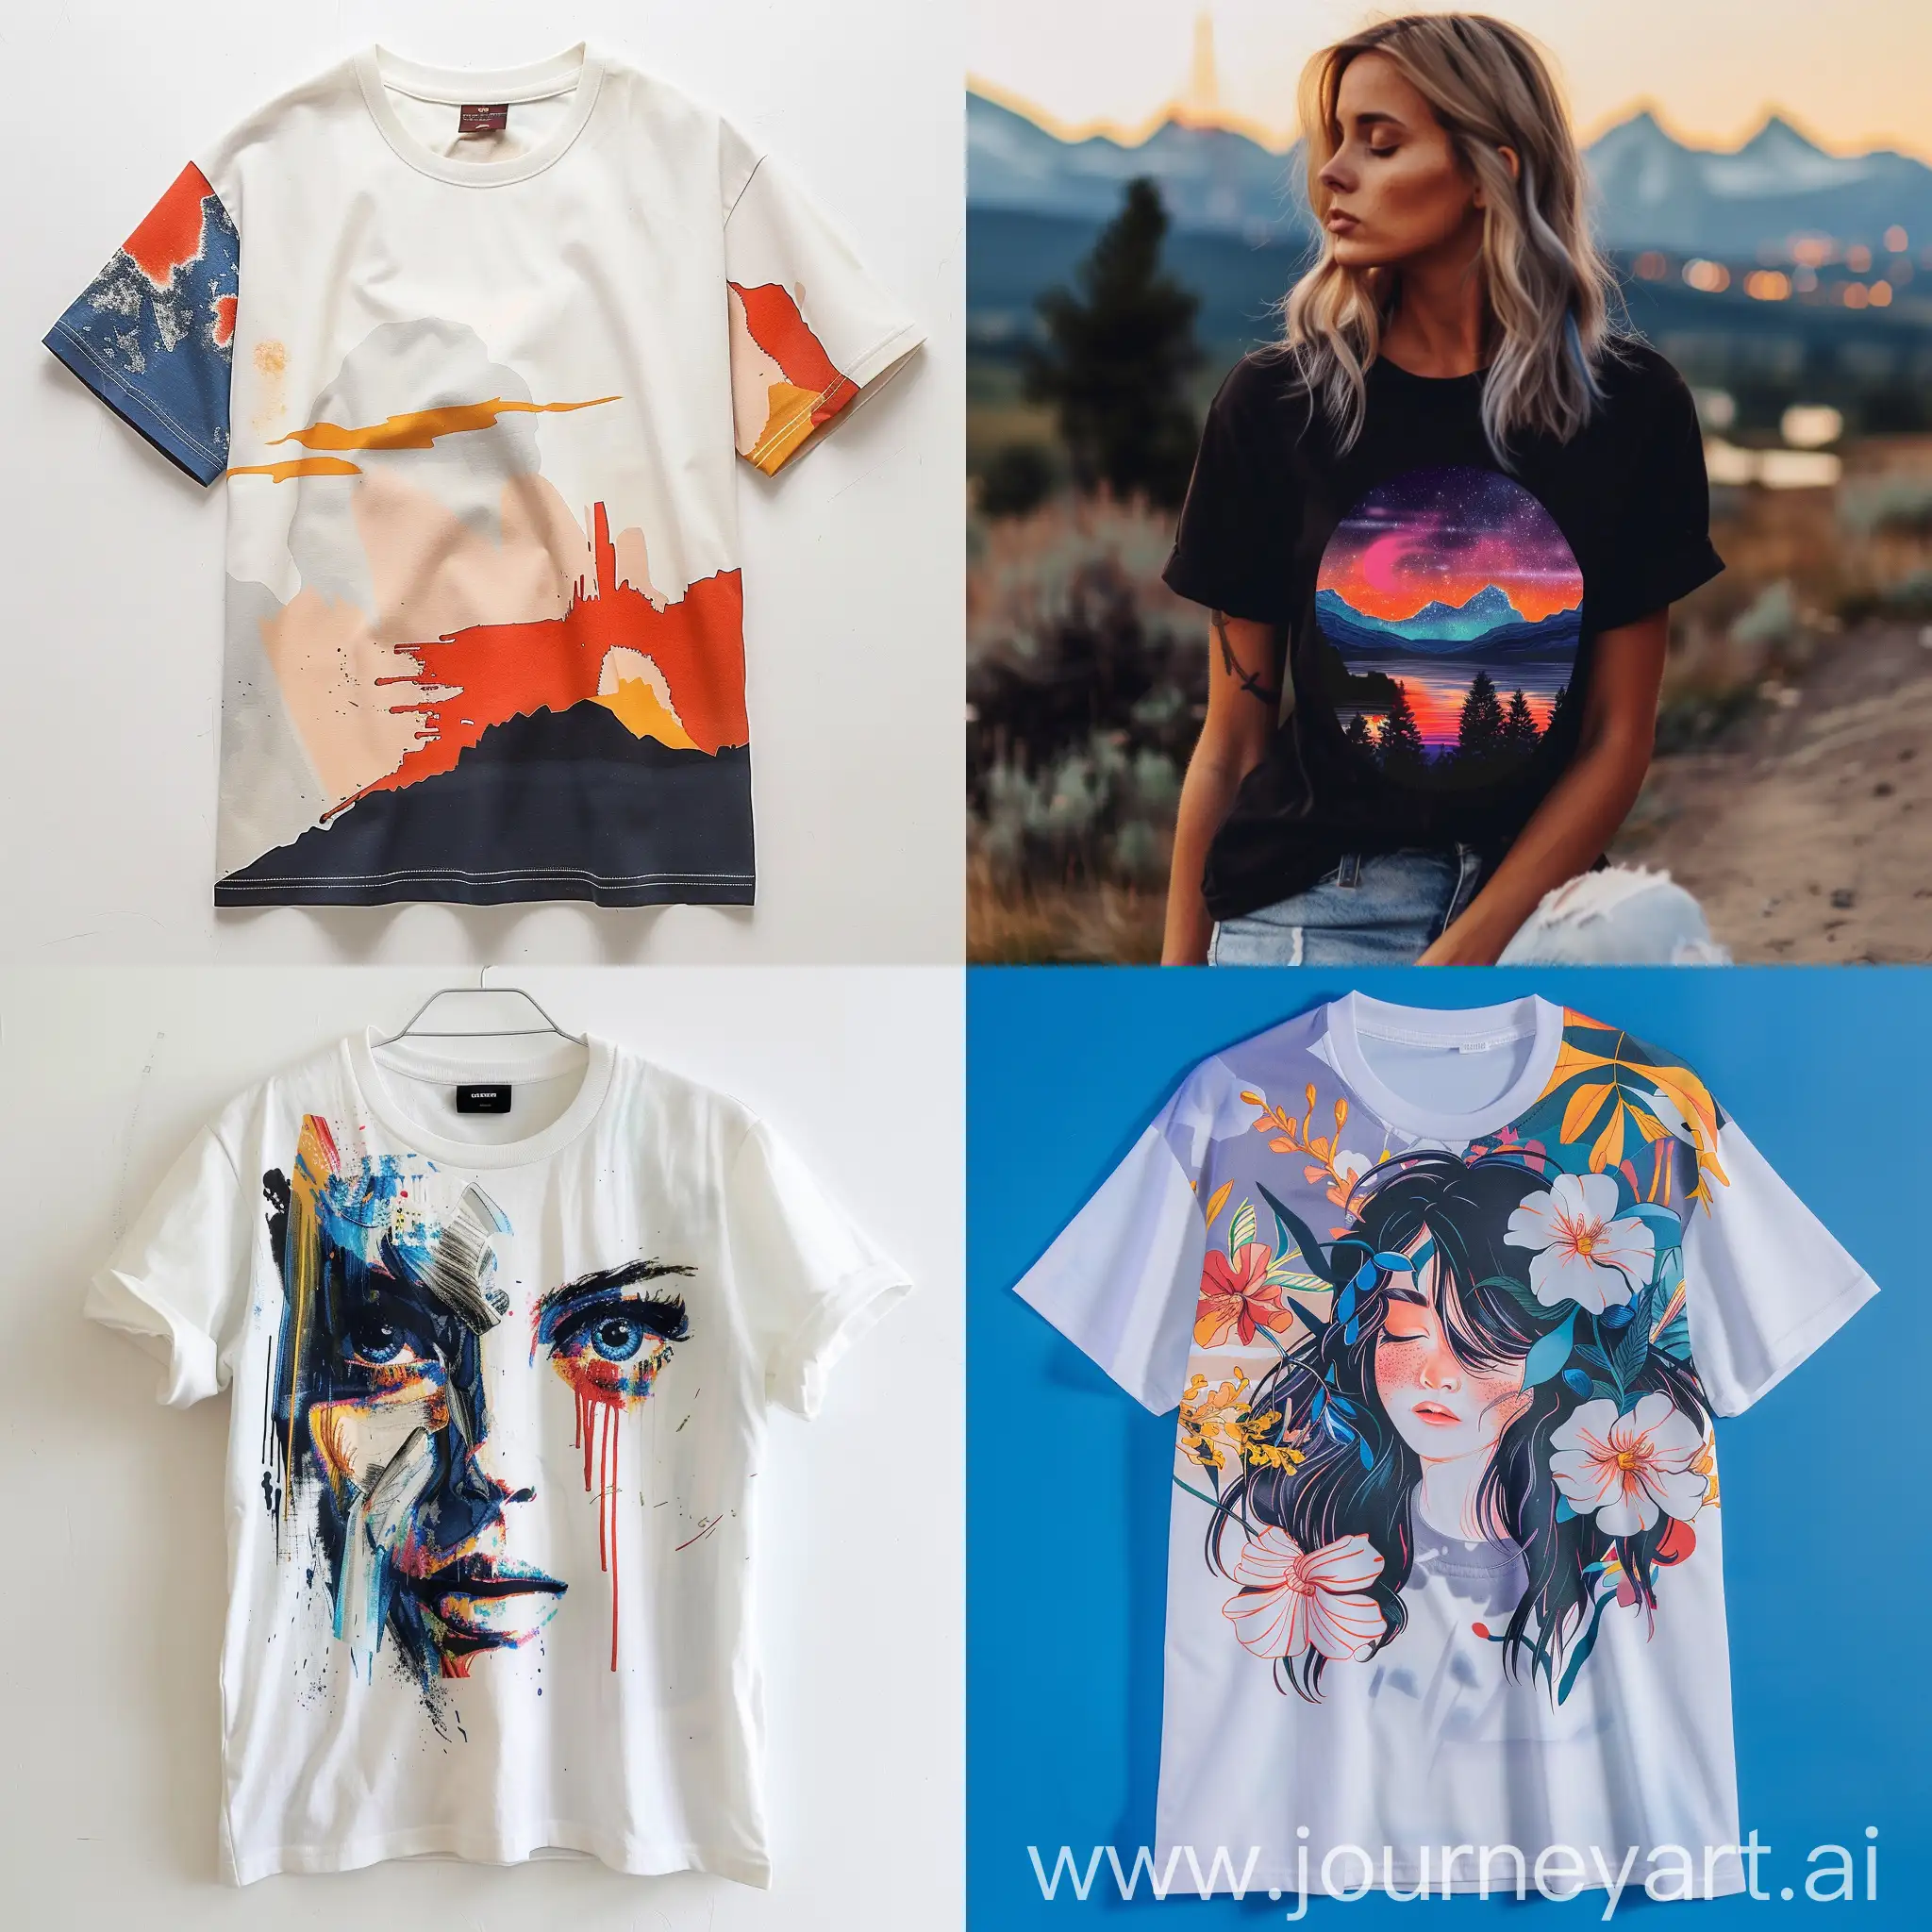 Printed aesthetic t-shirts